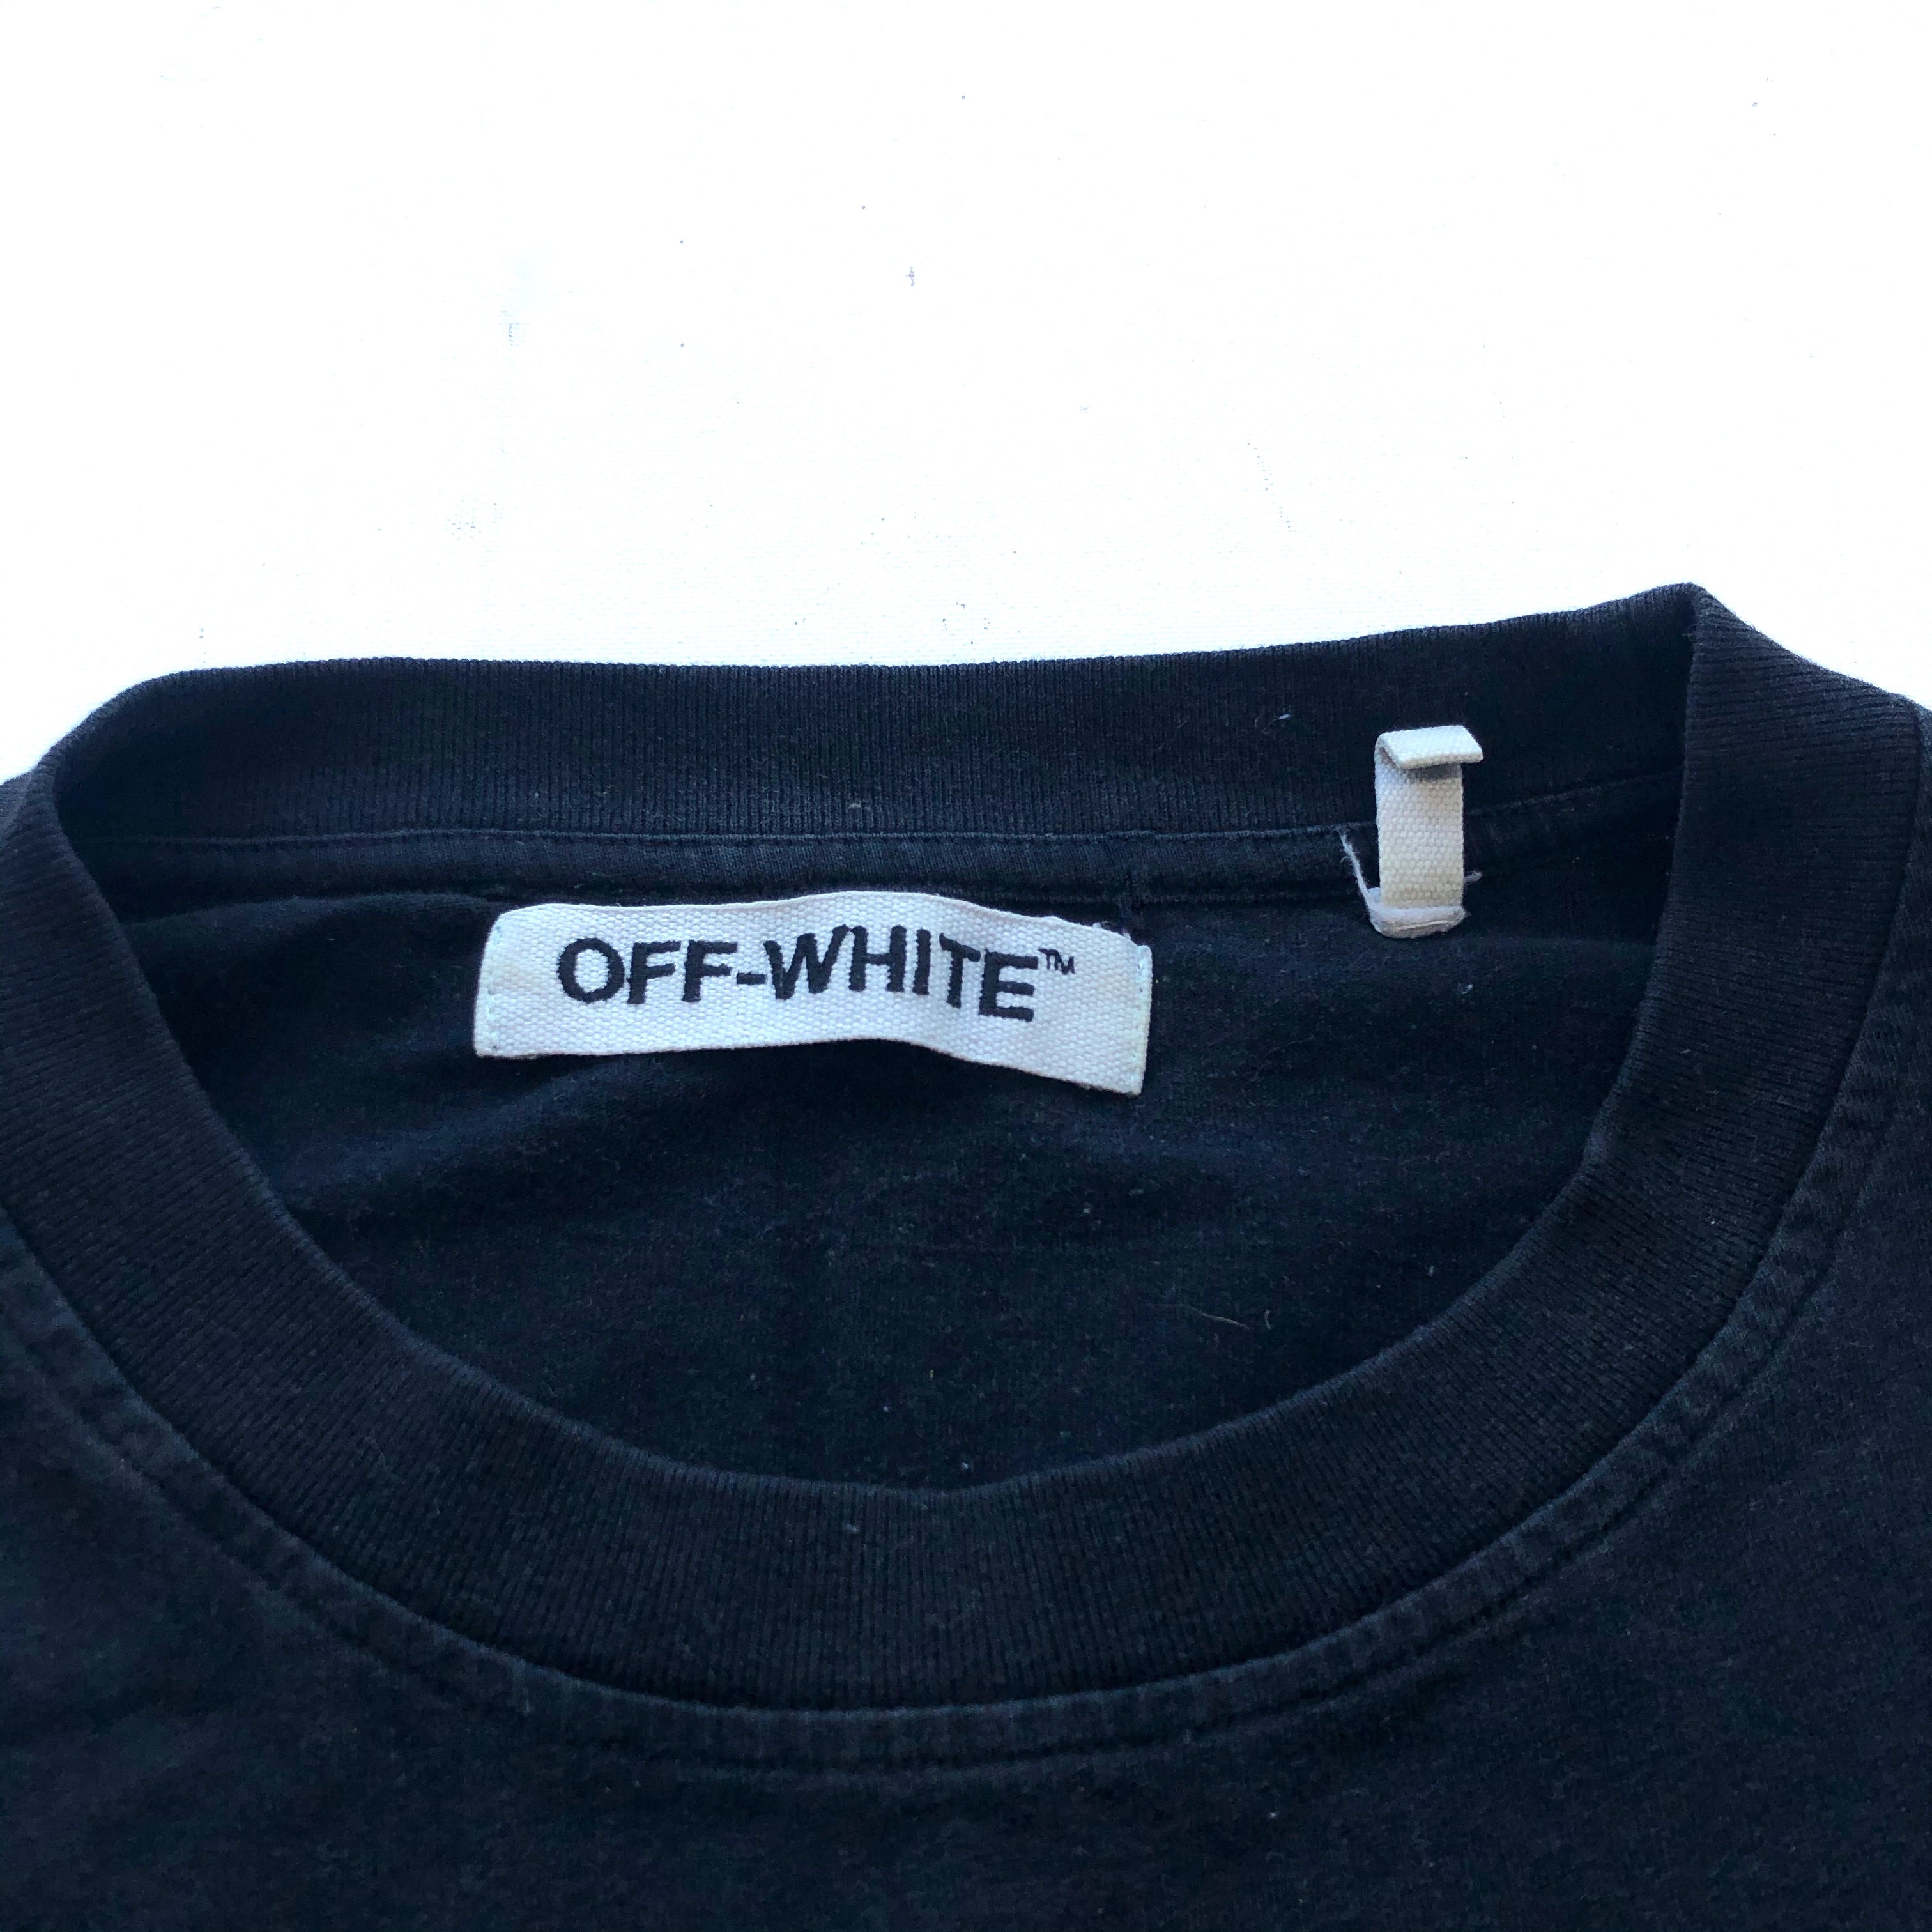 Off White Front Image Print Oversized Short Sleeved T Shirt with Iconic Arrows on the Back